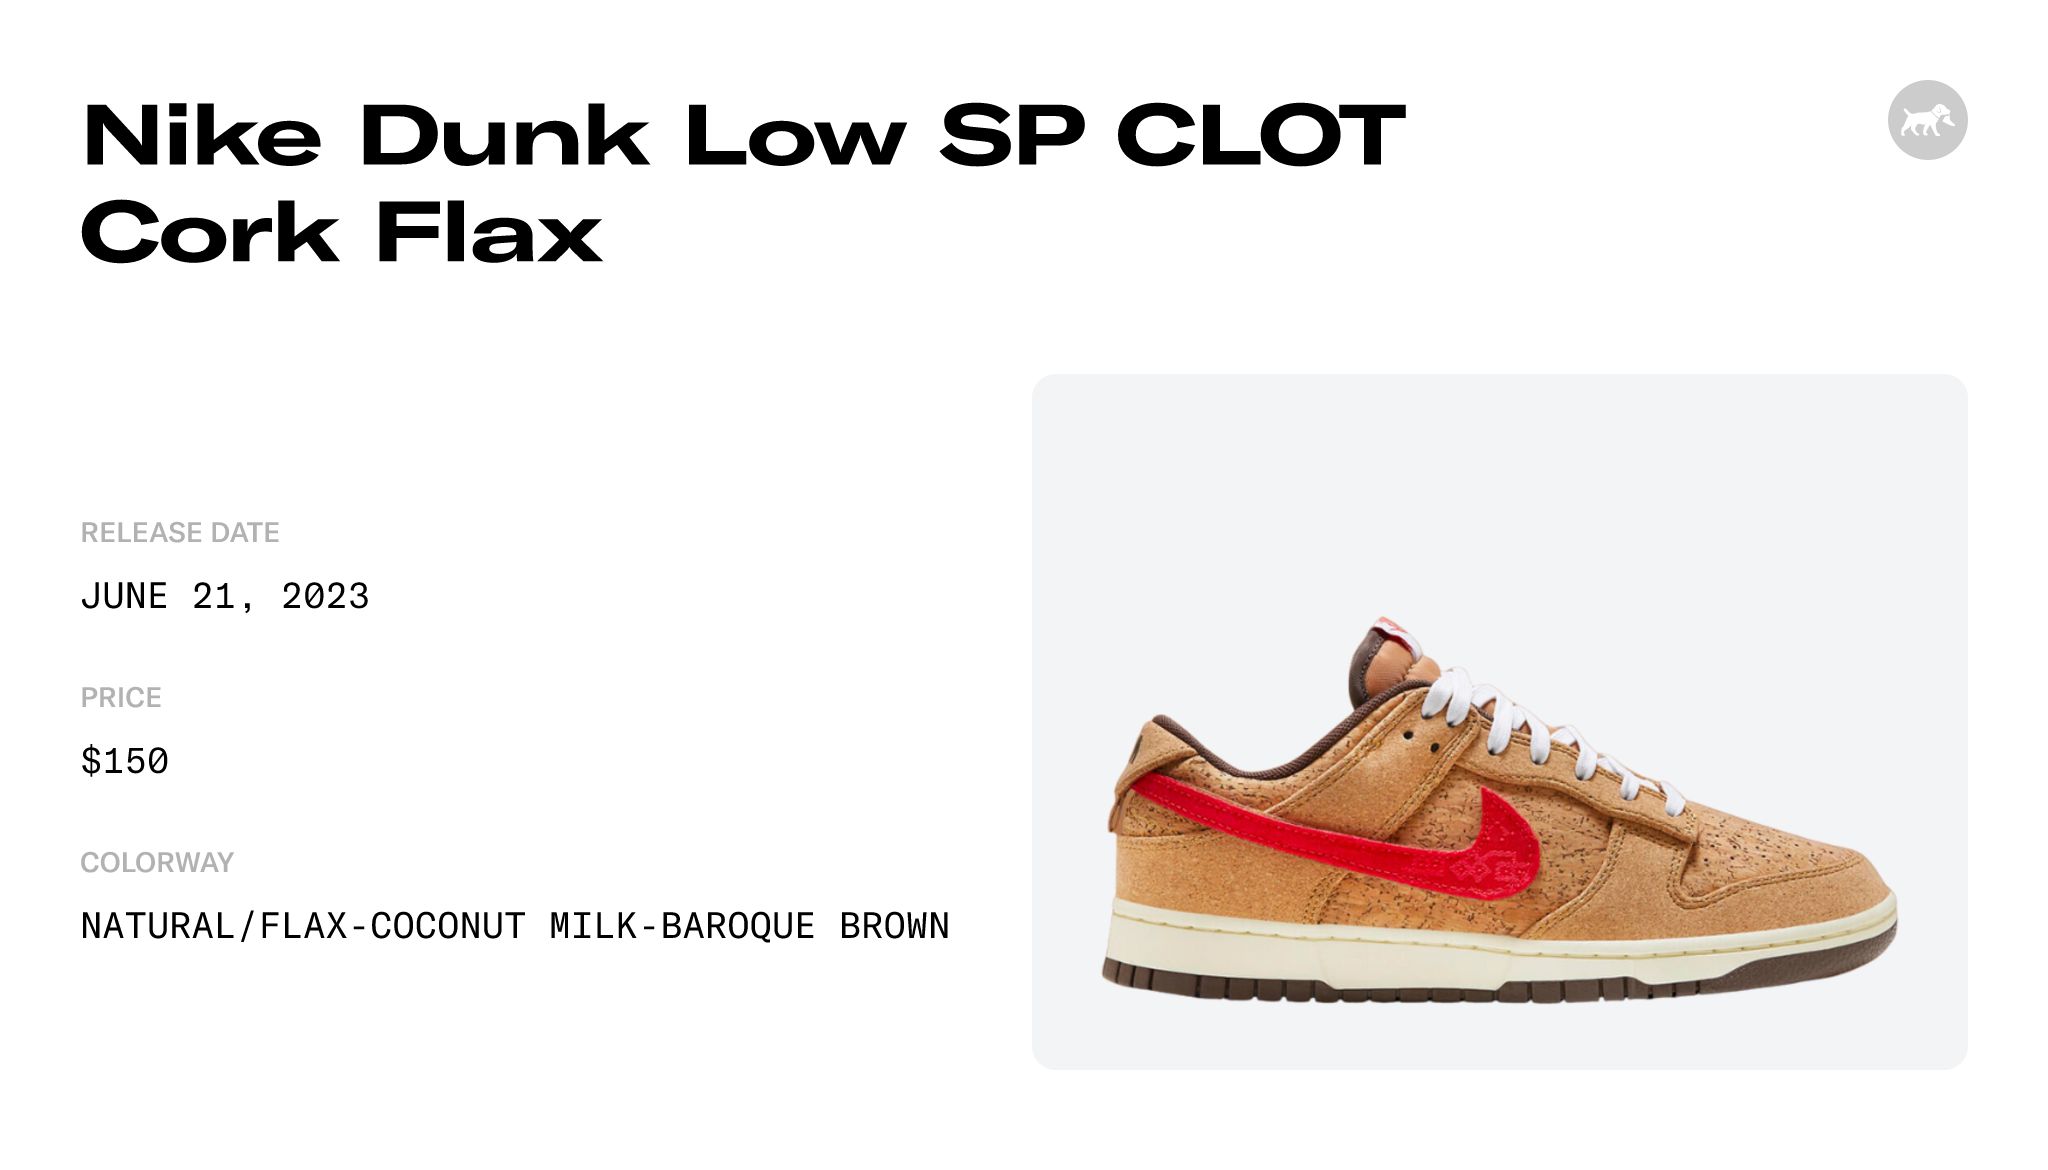 Nike Dunk Low SP CLOT Cork Flax Raffles and Release Date | Sole